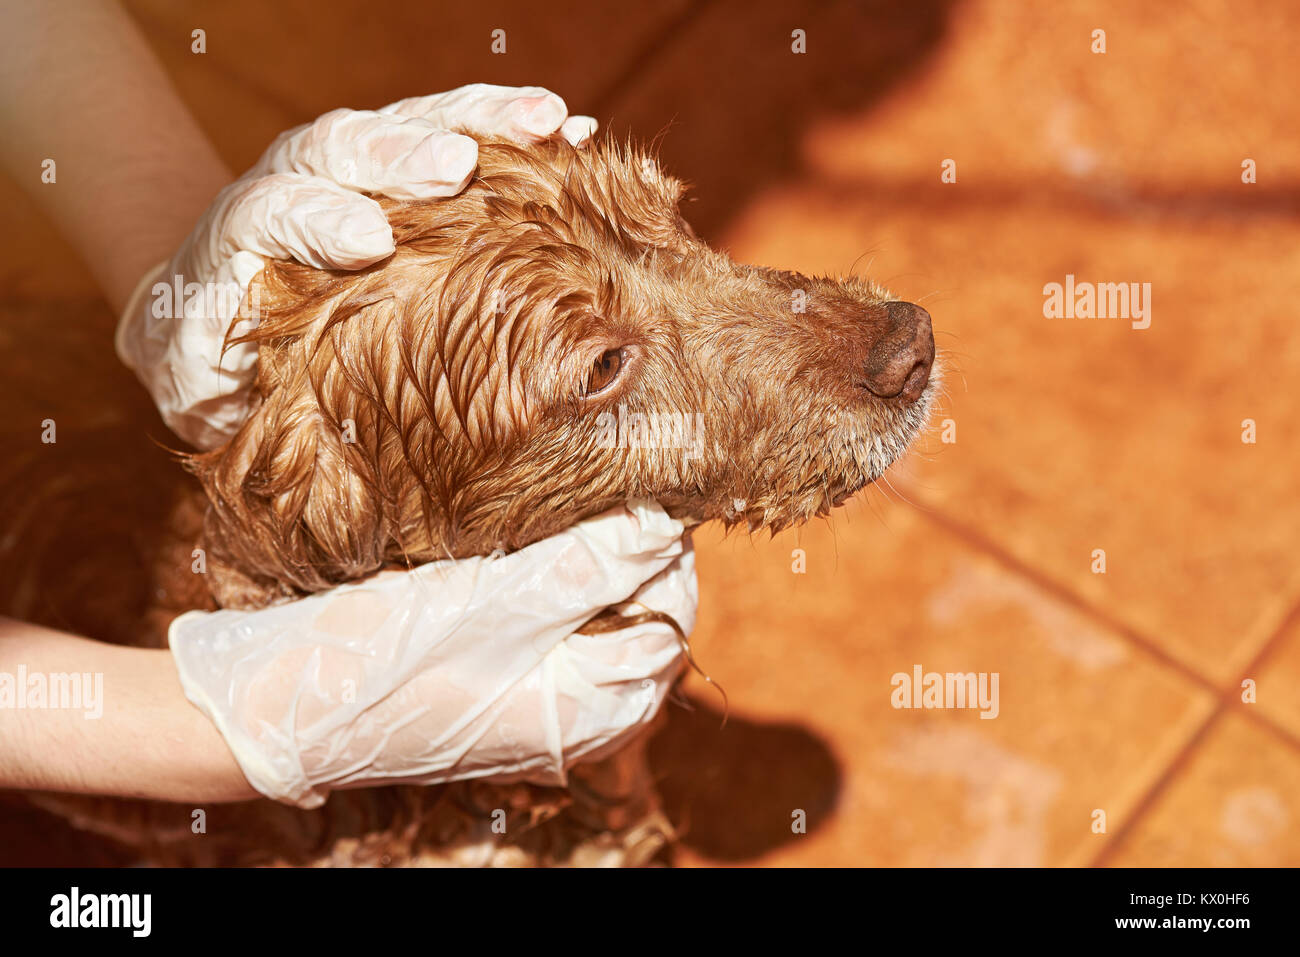 Cleaning brown dog from flea service. Close-up of wet spaniel dog head Stock Photo